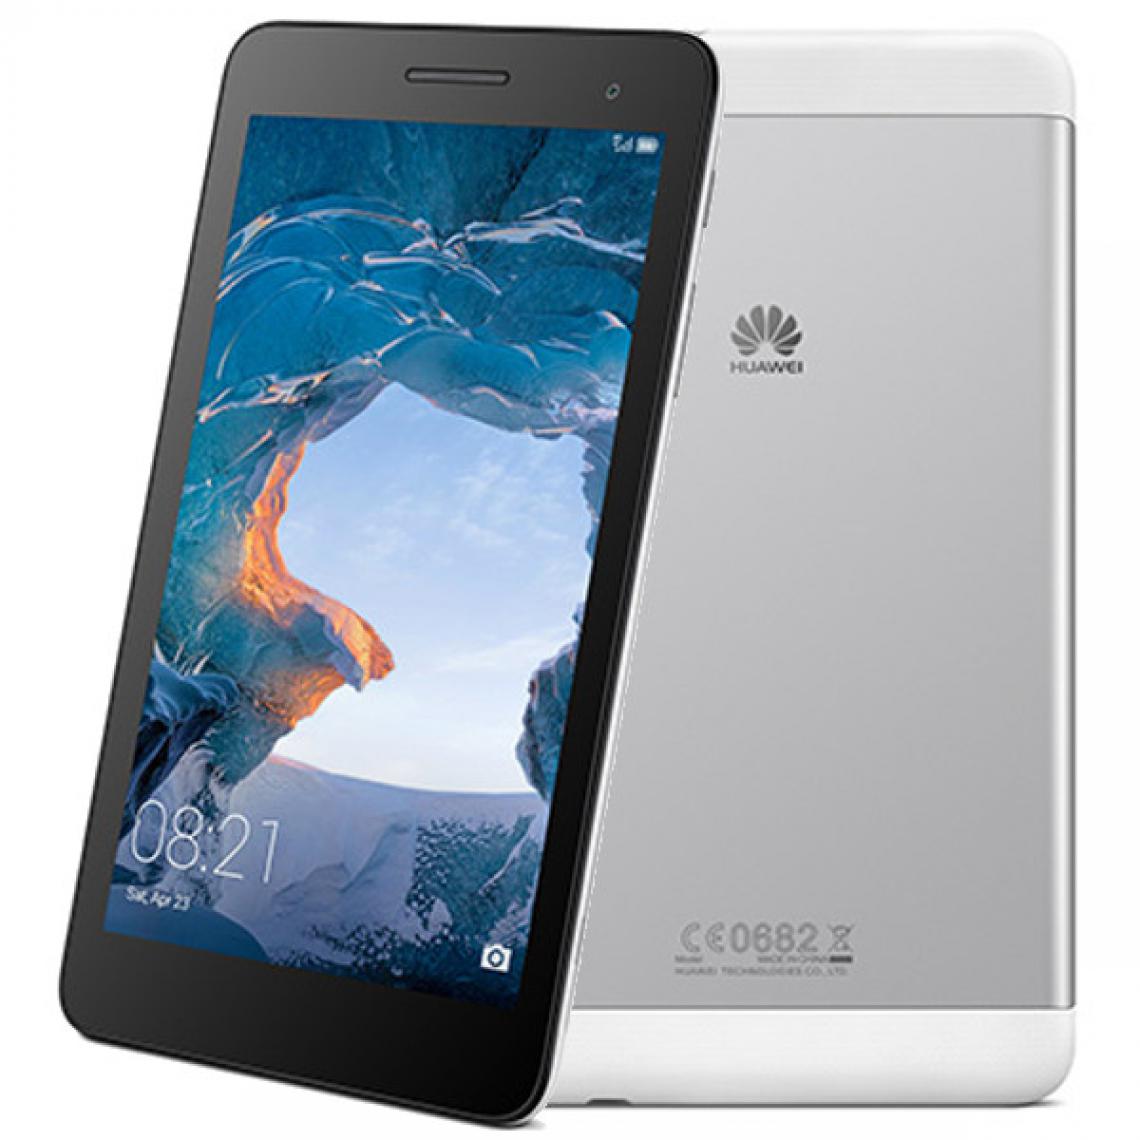 Huawei - Huawei MediaPad T2 7.0 LTE argent - Tablette Android